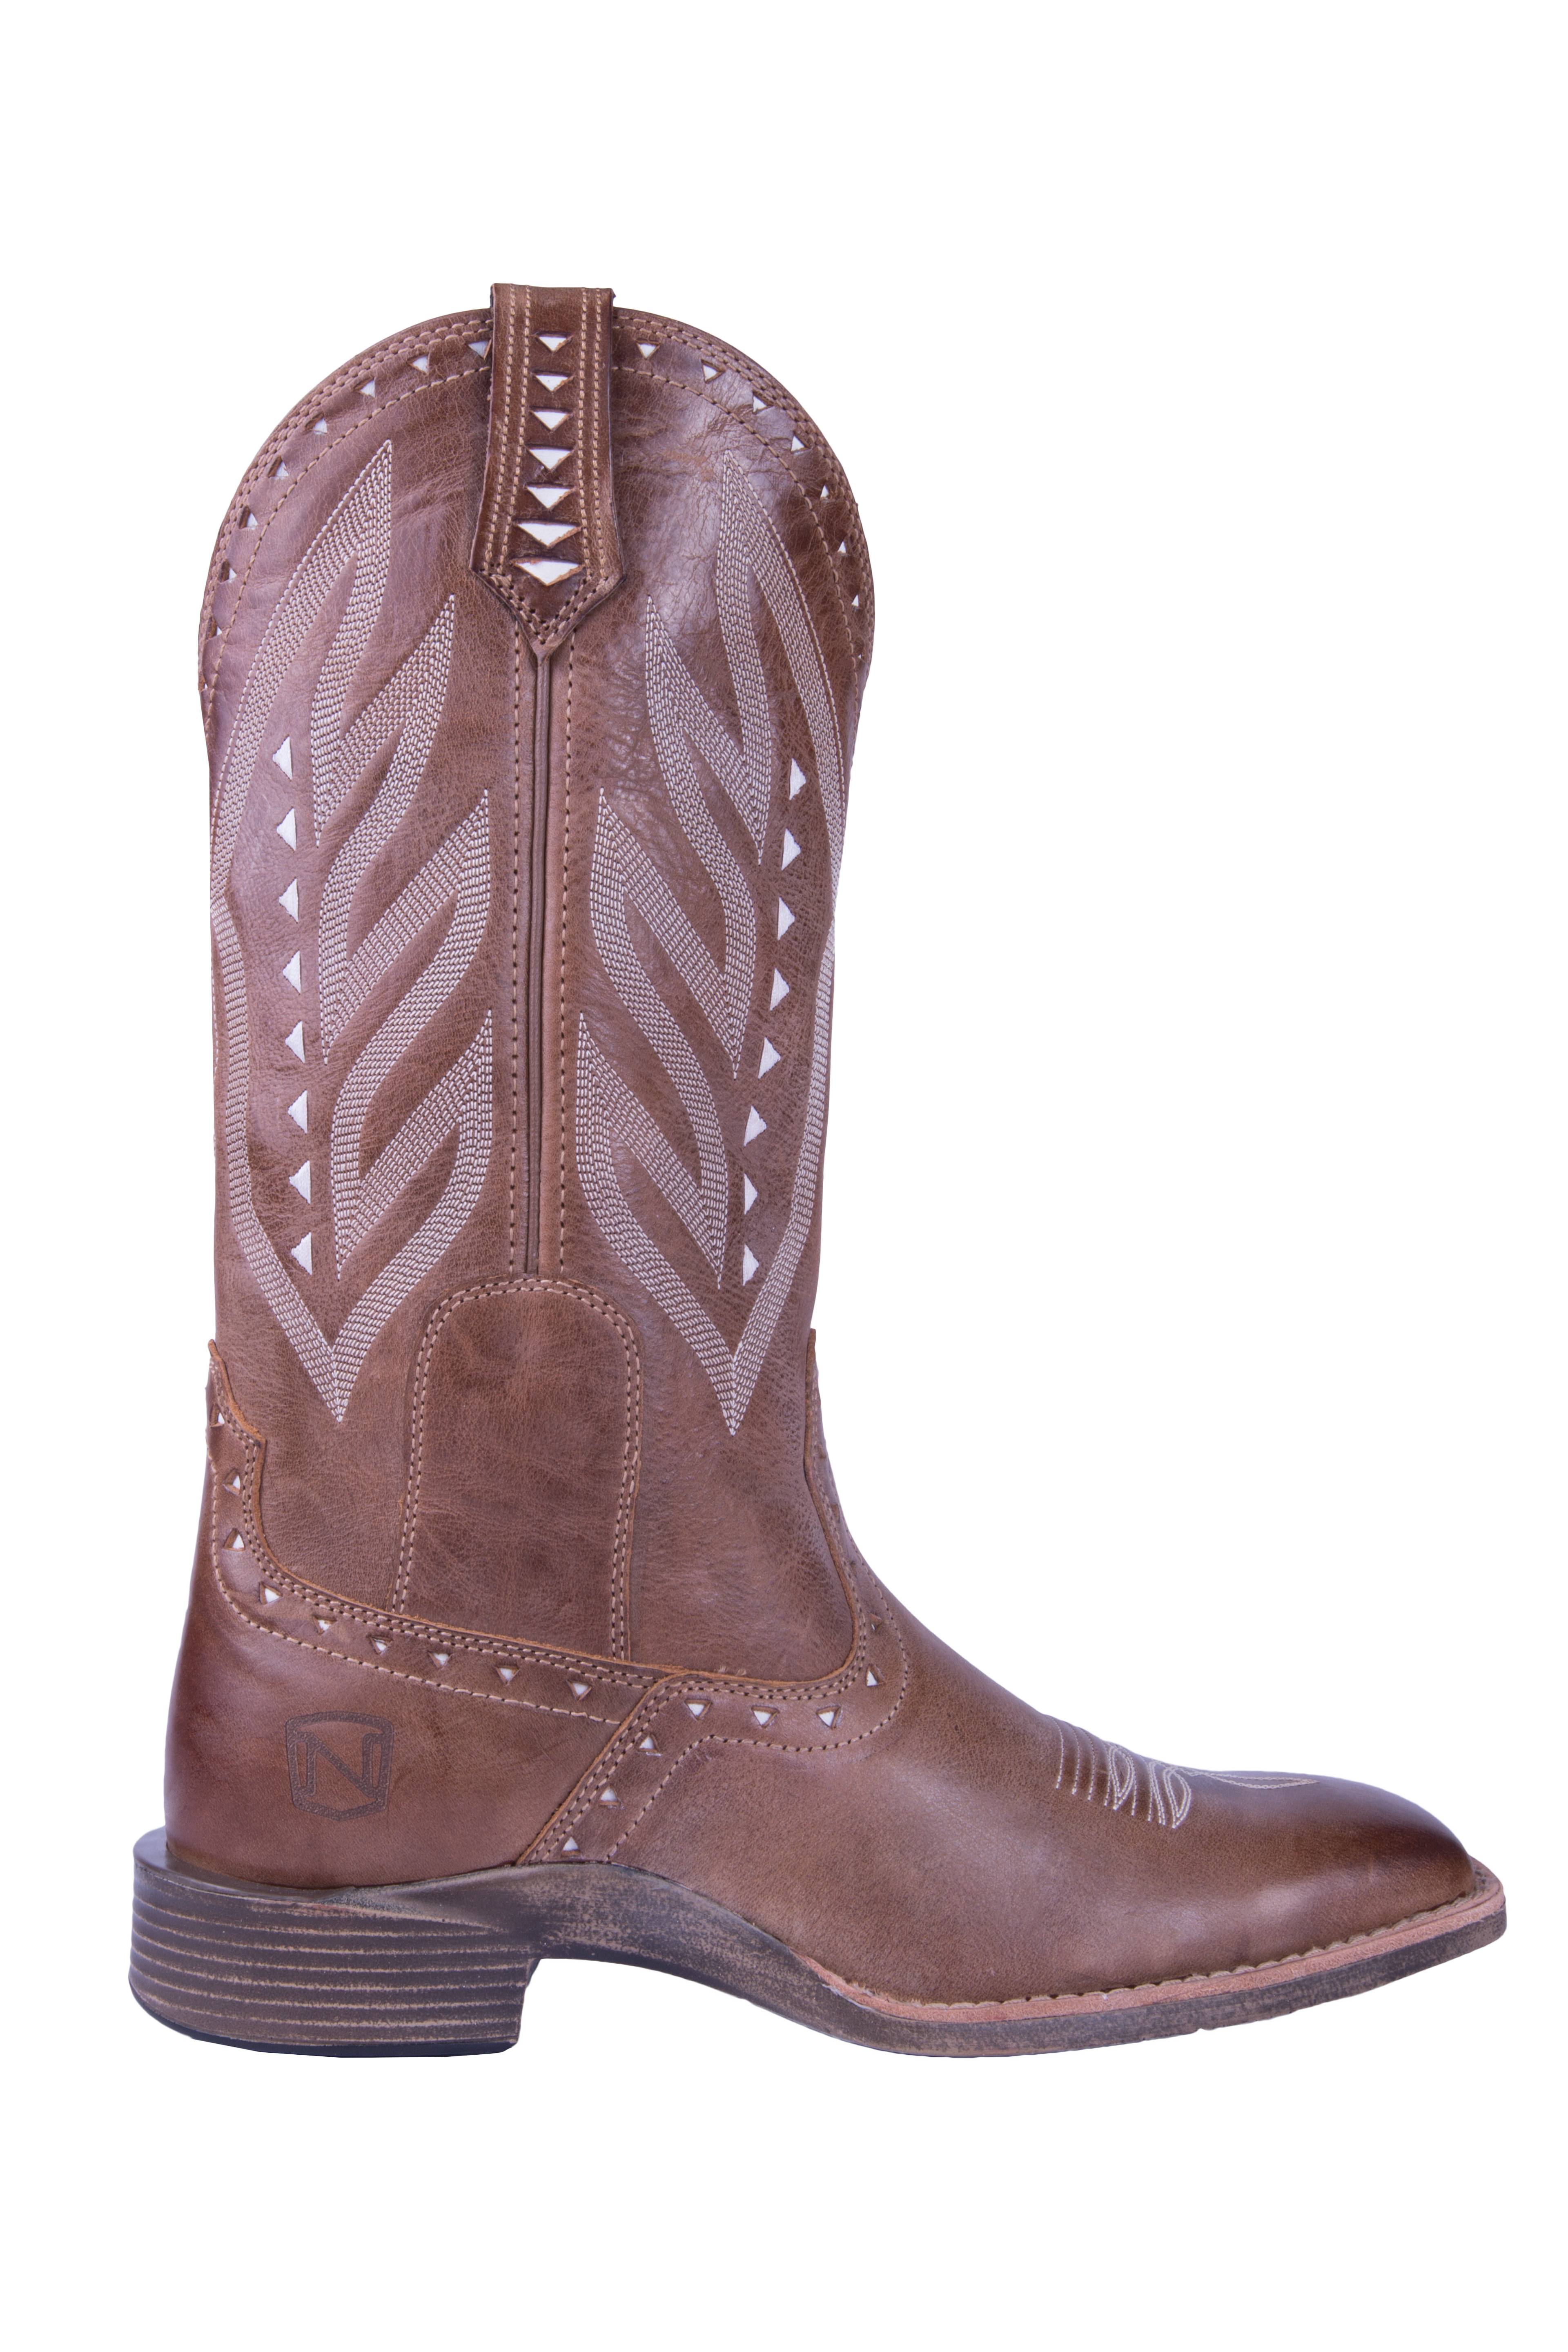 Noble Outfitters All Around Square Toe Vintage Boots - Ladies